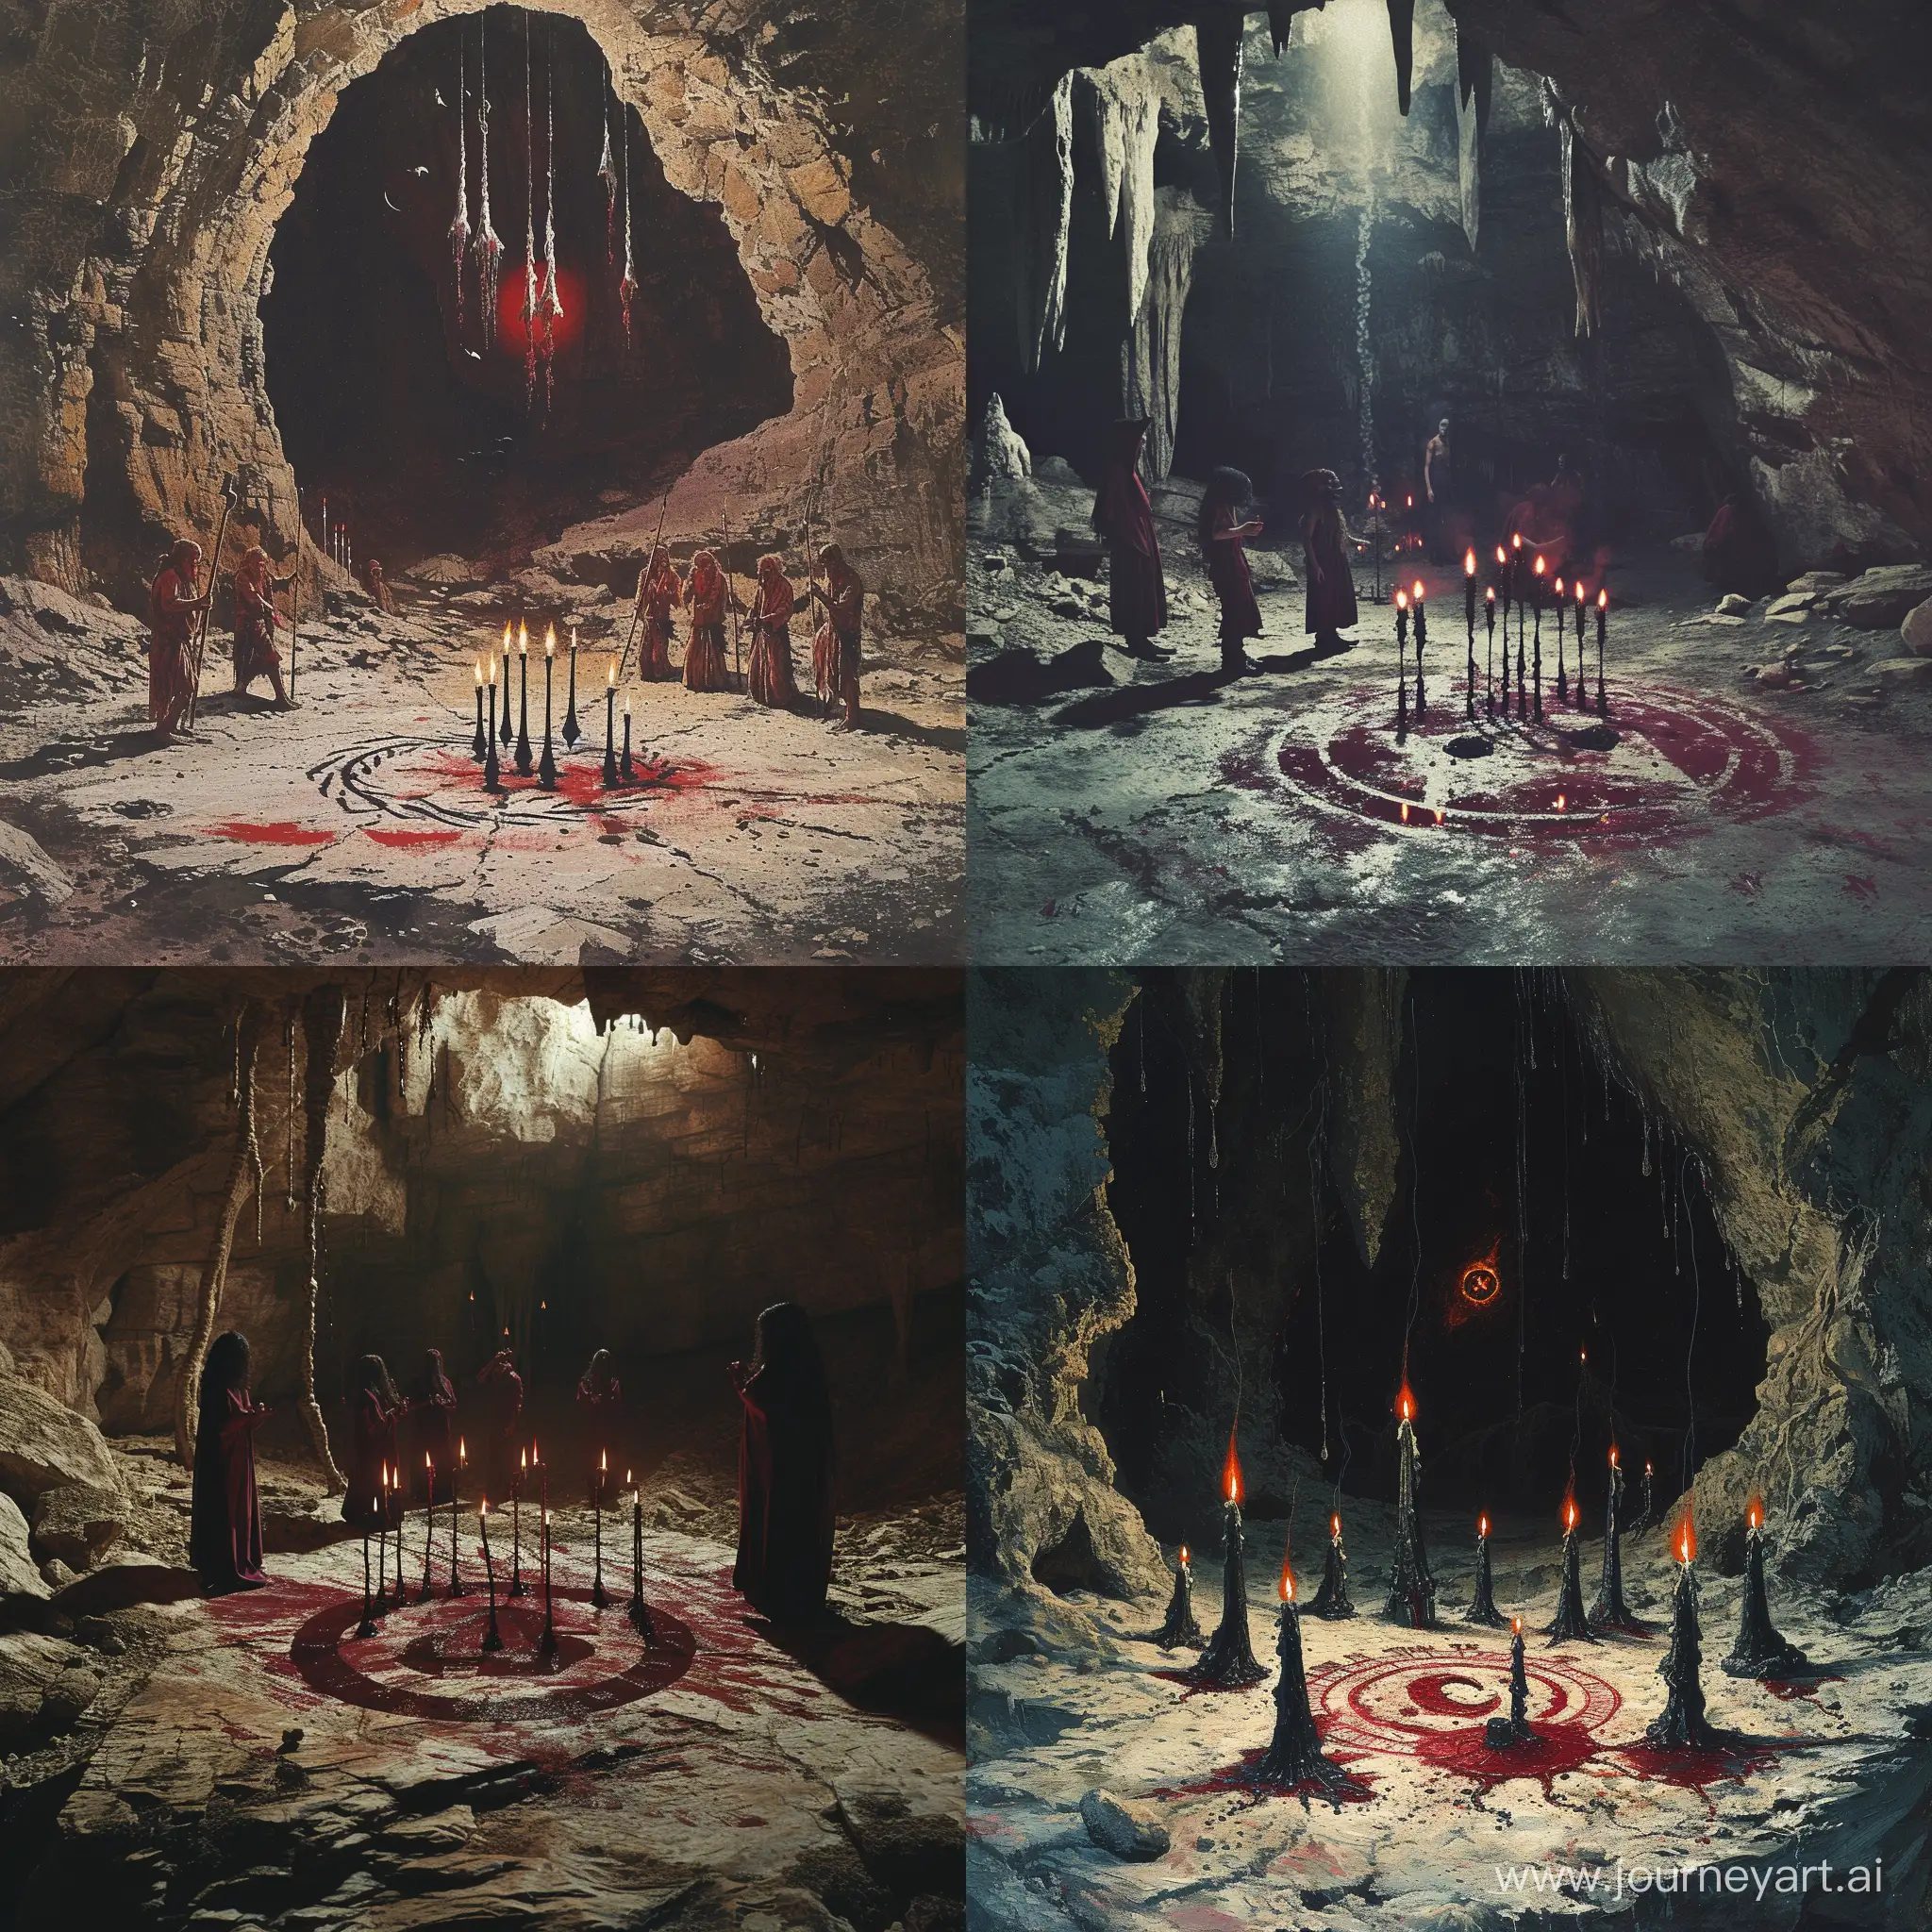 cavern veiled in perpetual darkness, the ritual involves a sacrificial ceremony with candles made from blackened wax and blood, A demonic sigil is inscribed on the floor, shadows coalesce around the participants, blood moon, 1970's dark fantasy style, gritty, aesthetic, detailed, vintage